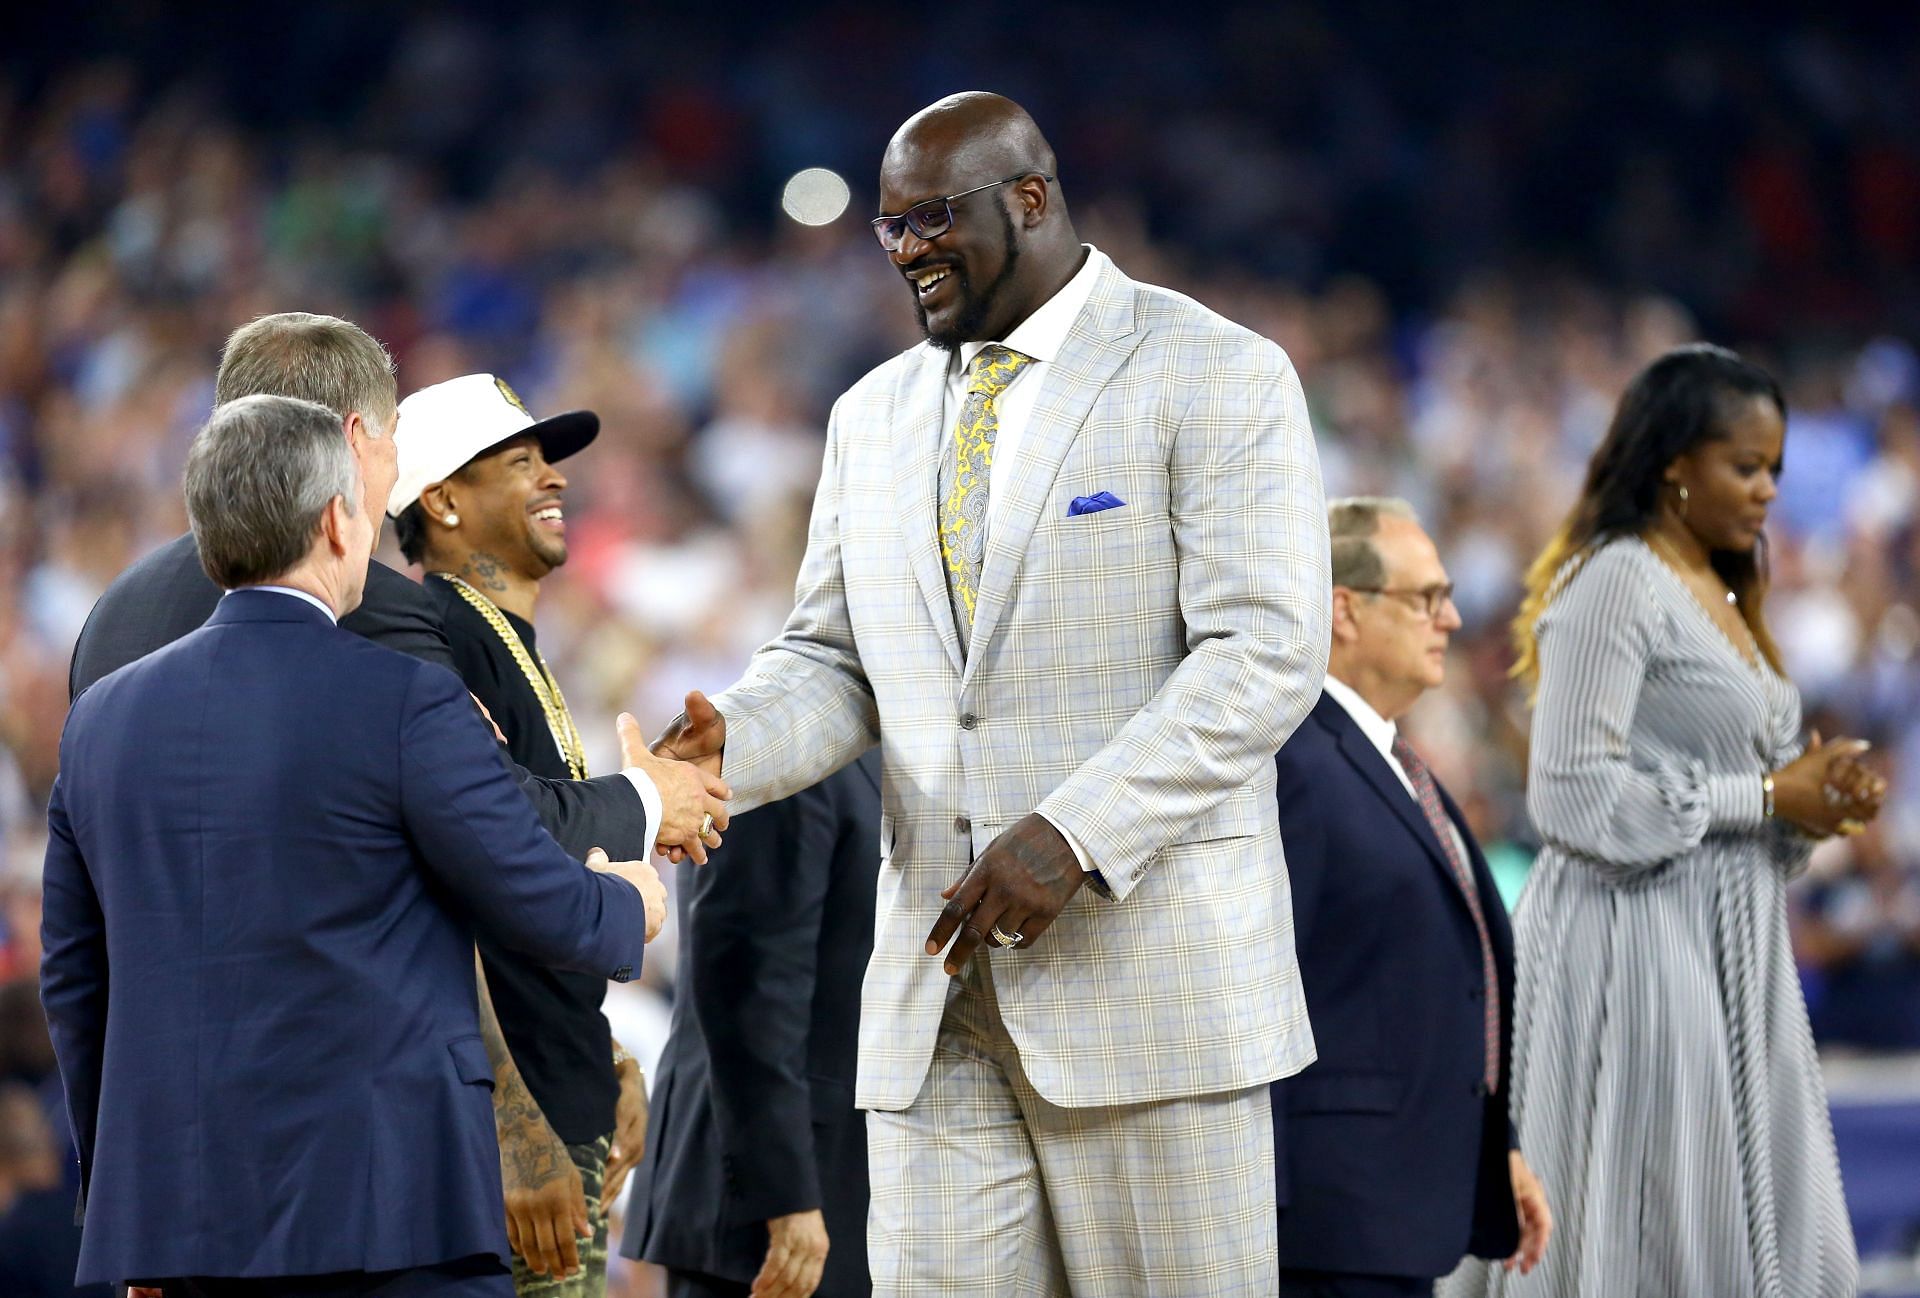 Shaquille was enshrined in the Naismith Memorial Basketball Hall Of Fame in 2016.